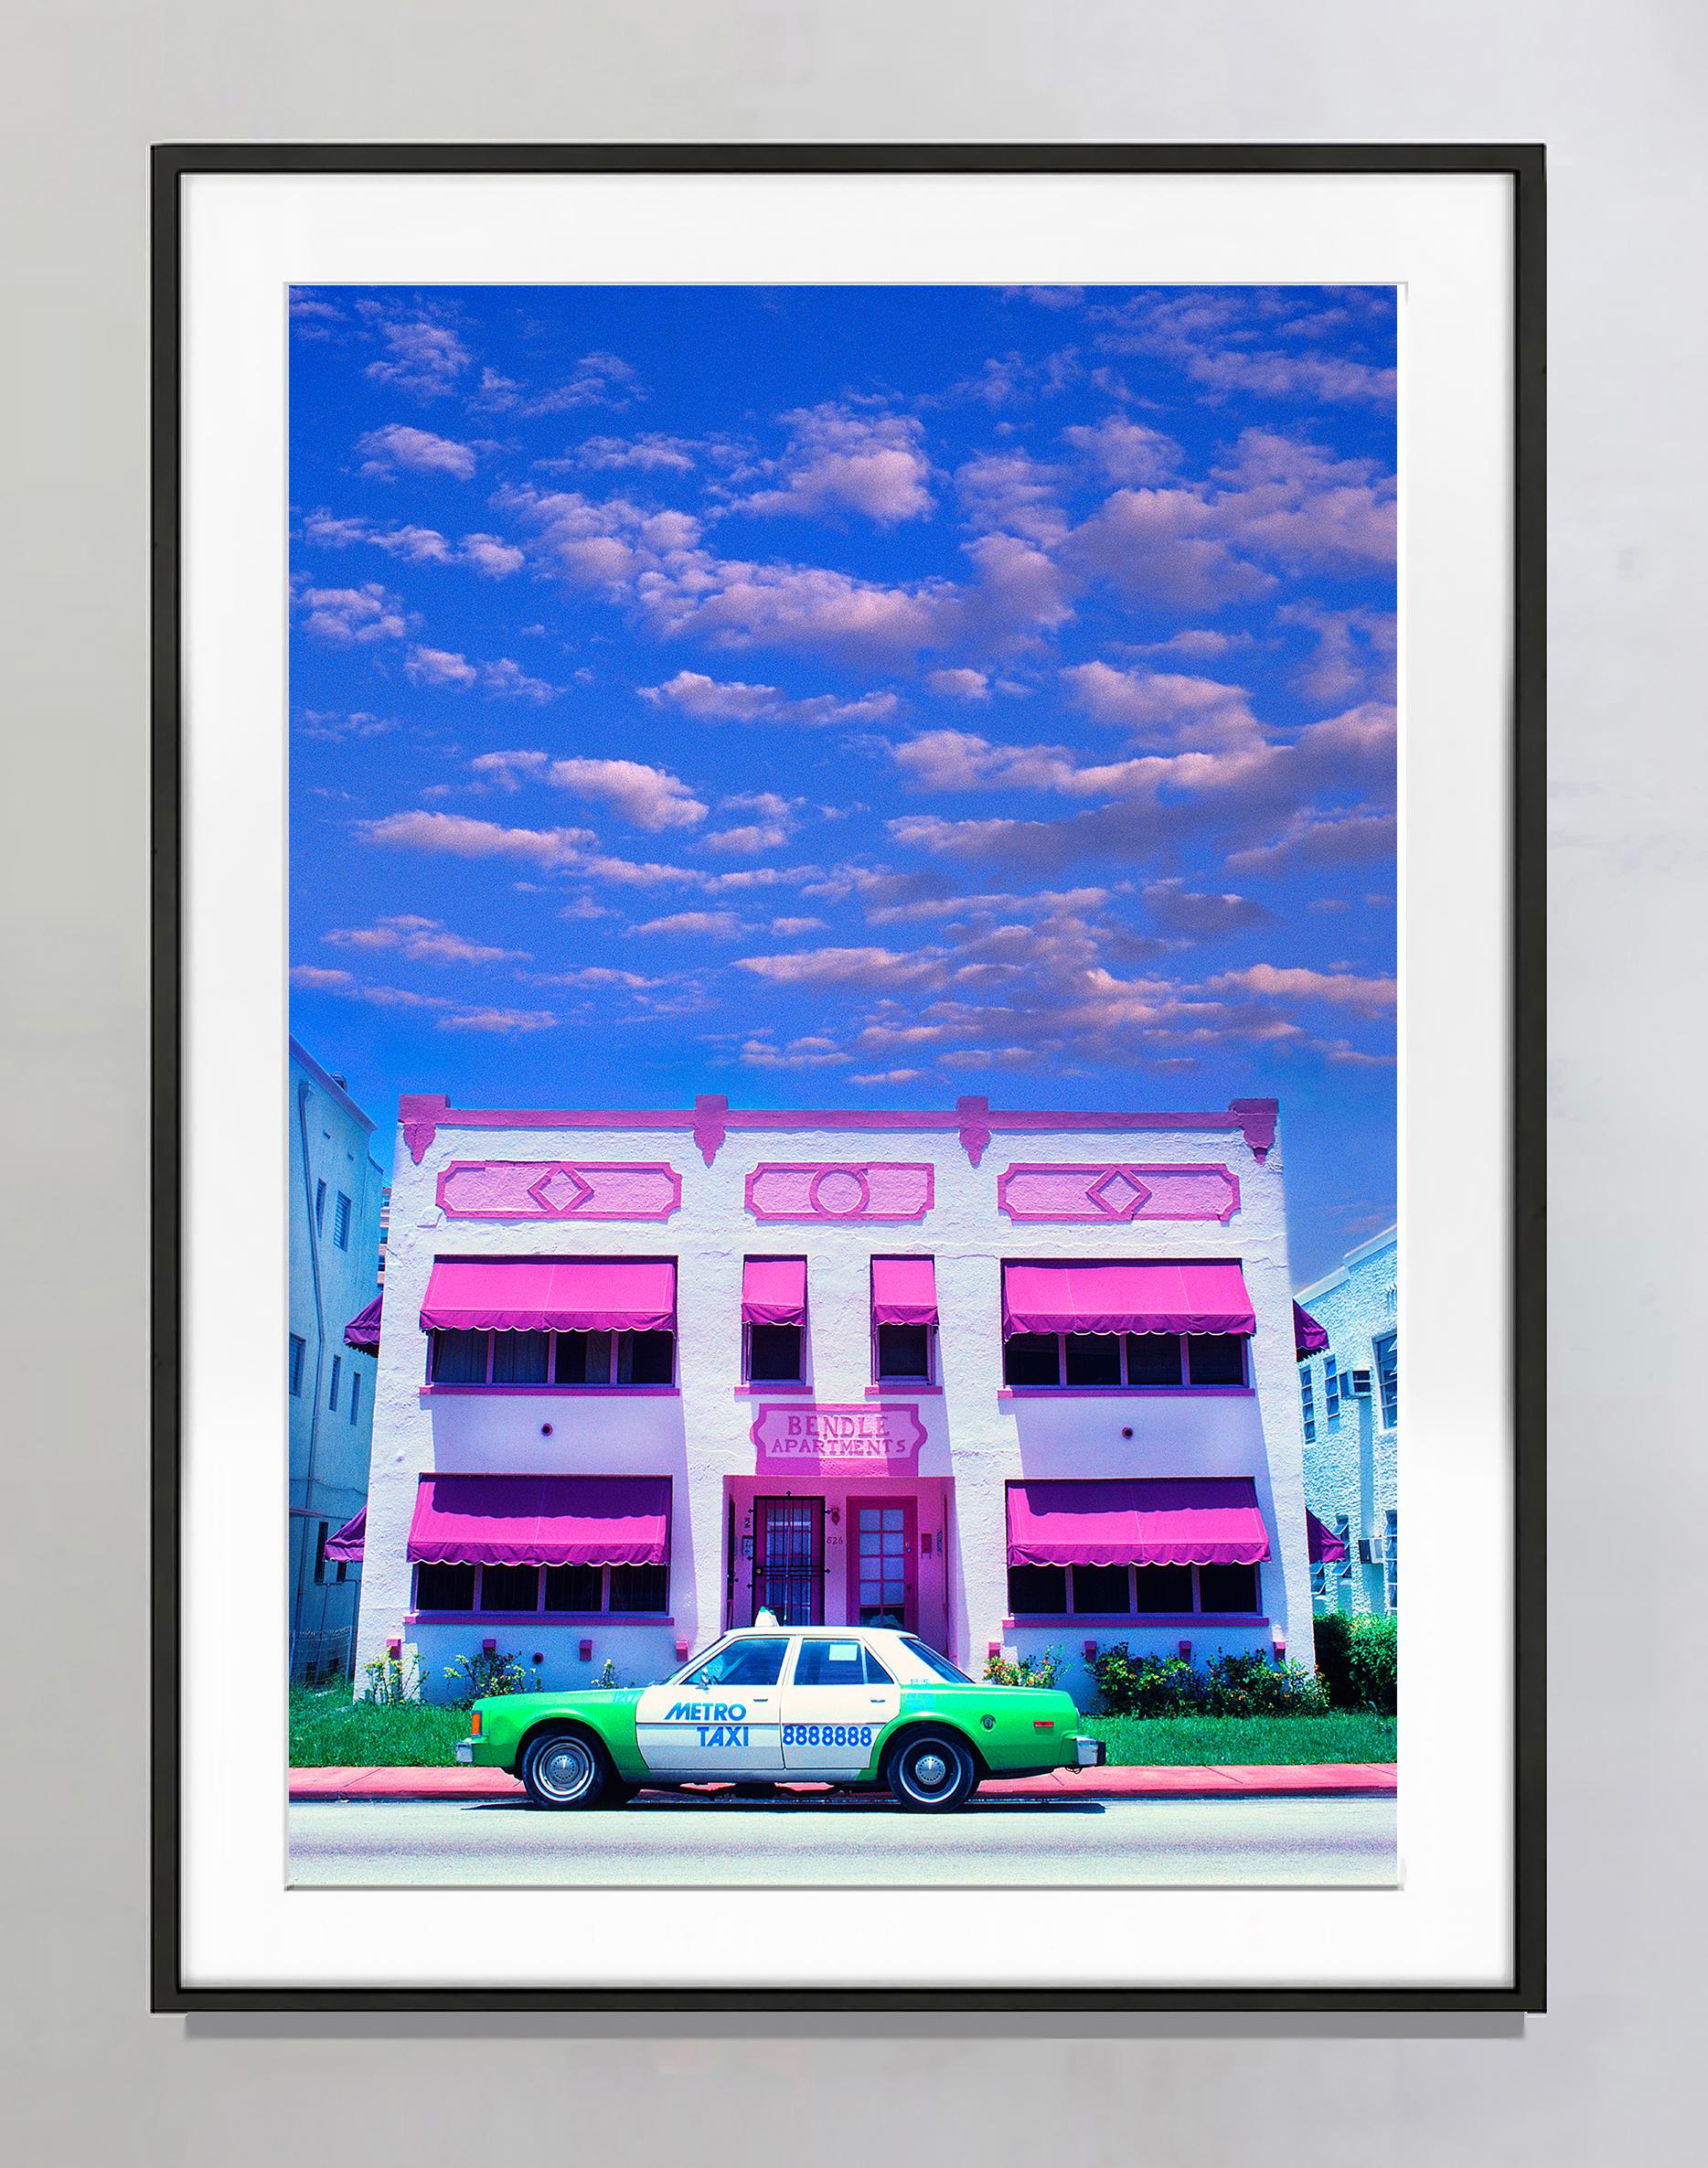 Art Deco District Miami Beach in the 80's, Pinks and Blues - Photograph by Mitchell Funk